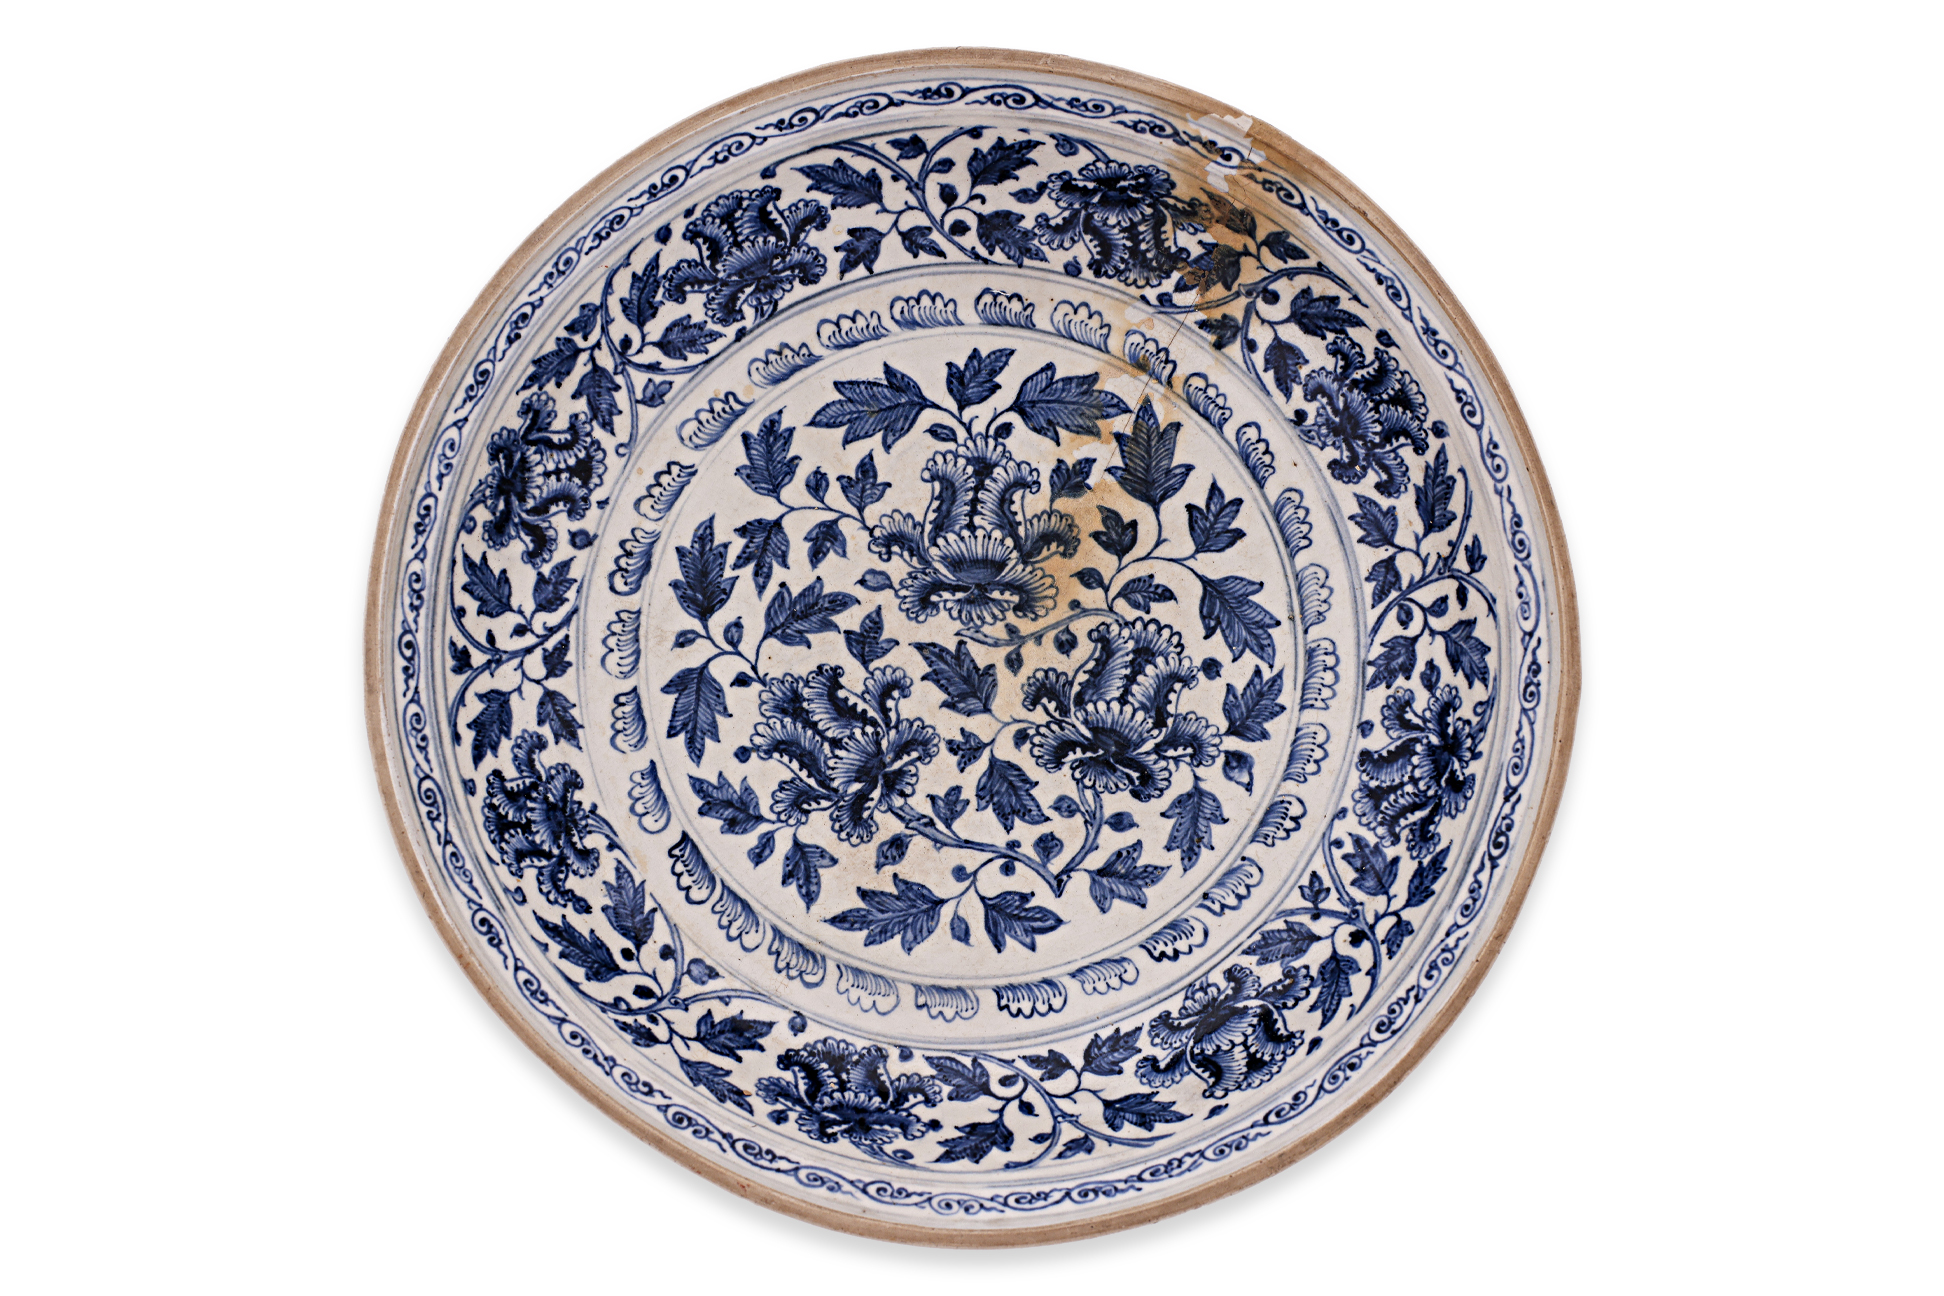 A LARGE VIETNAMESE BLUE AND WHITE PEONY DISH